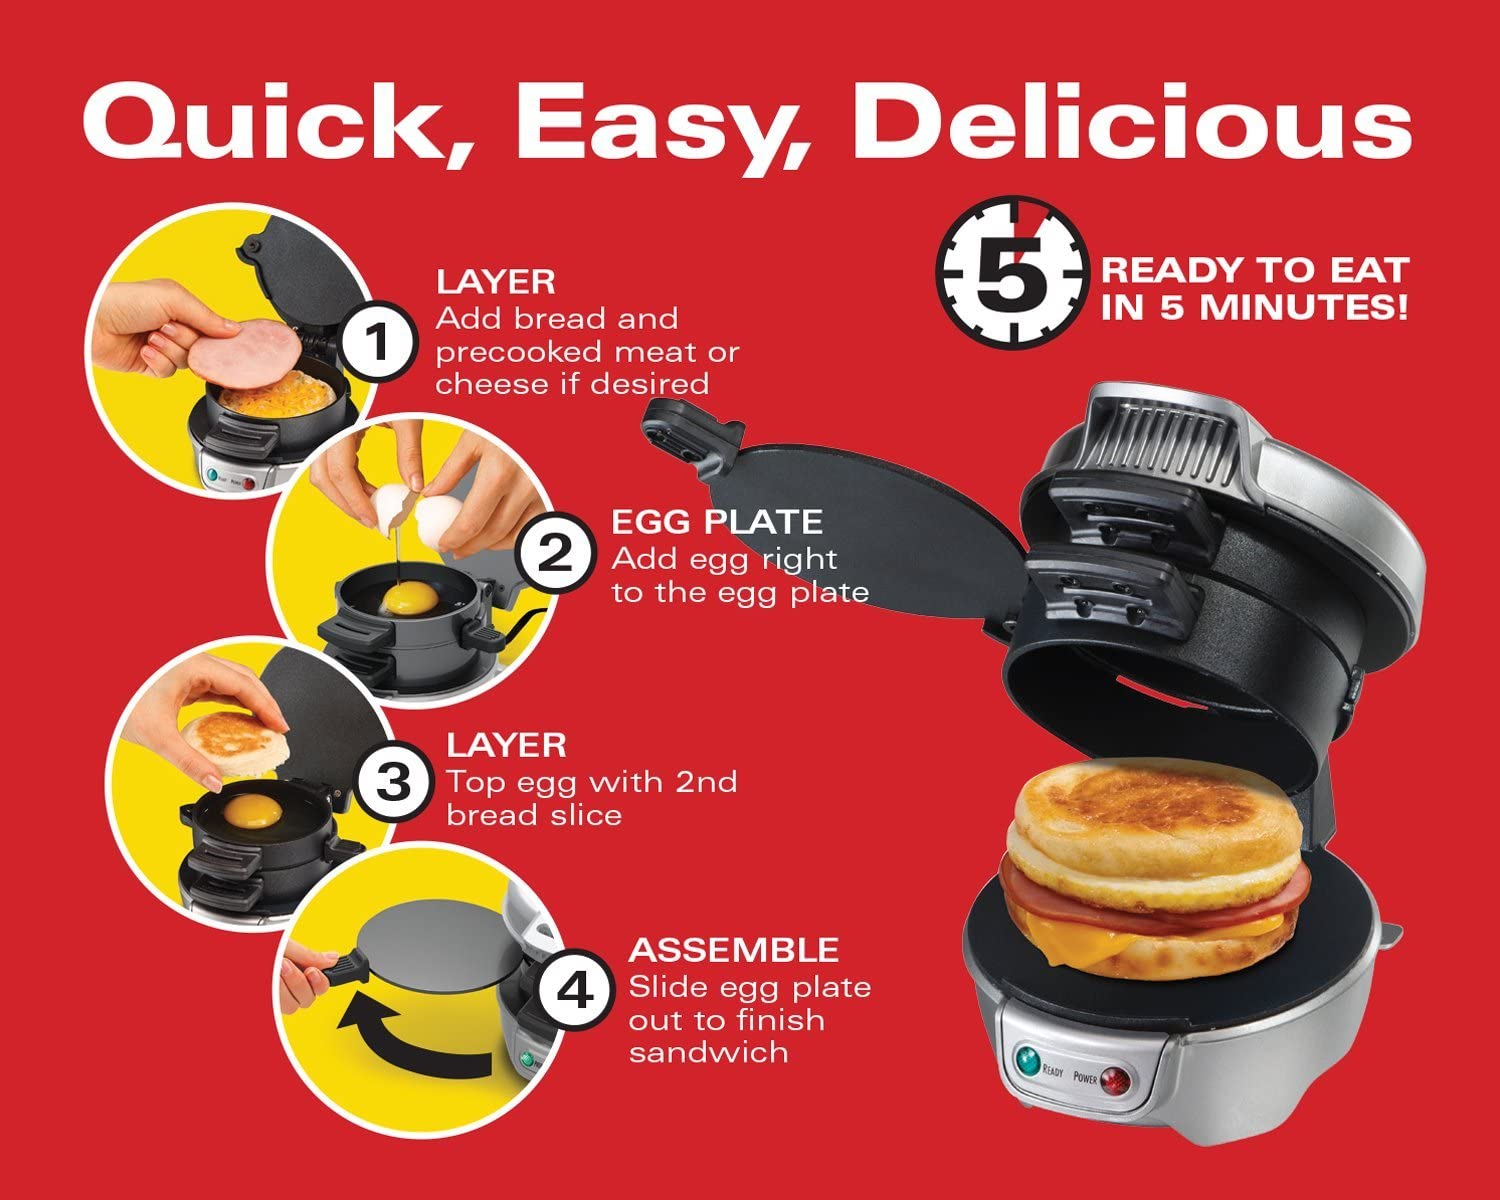  Hamilton Beach Breakfast Sandwich Maker with Egg Cooker Ring,  Customize Ingredients, Perfect for English Muffins, Croissants, Mini  Waffles, Perfect White Elephant Gifts, Red (25476): Egg Sandwich Maker:  Home & Kitchen